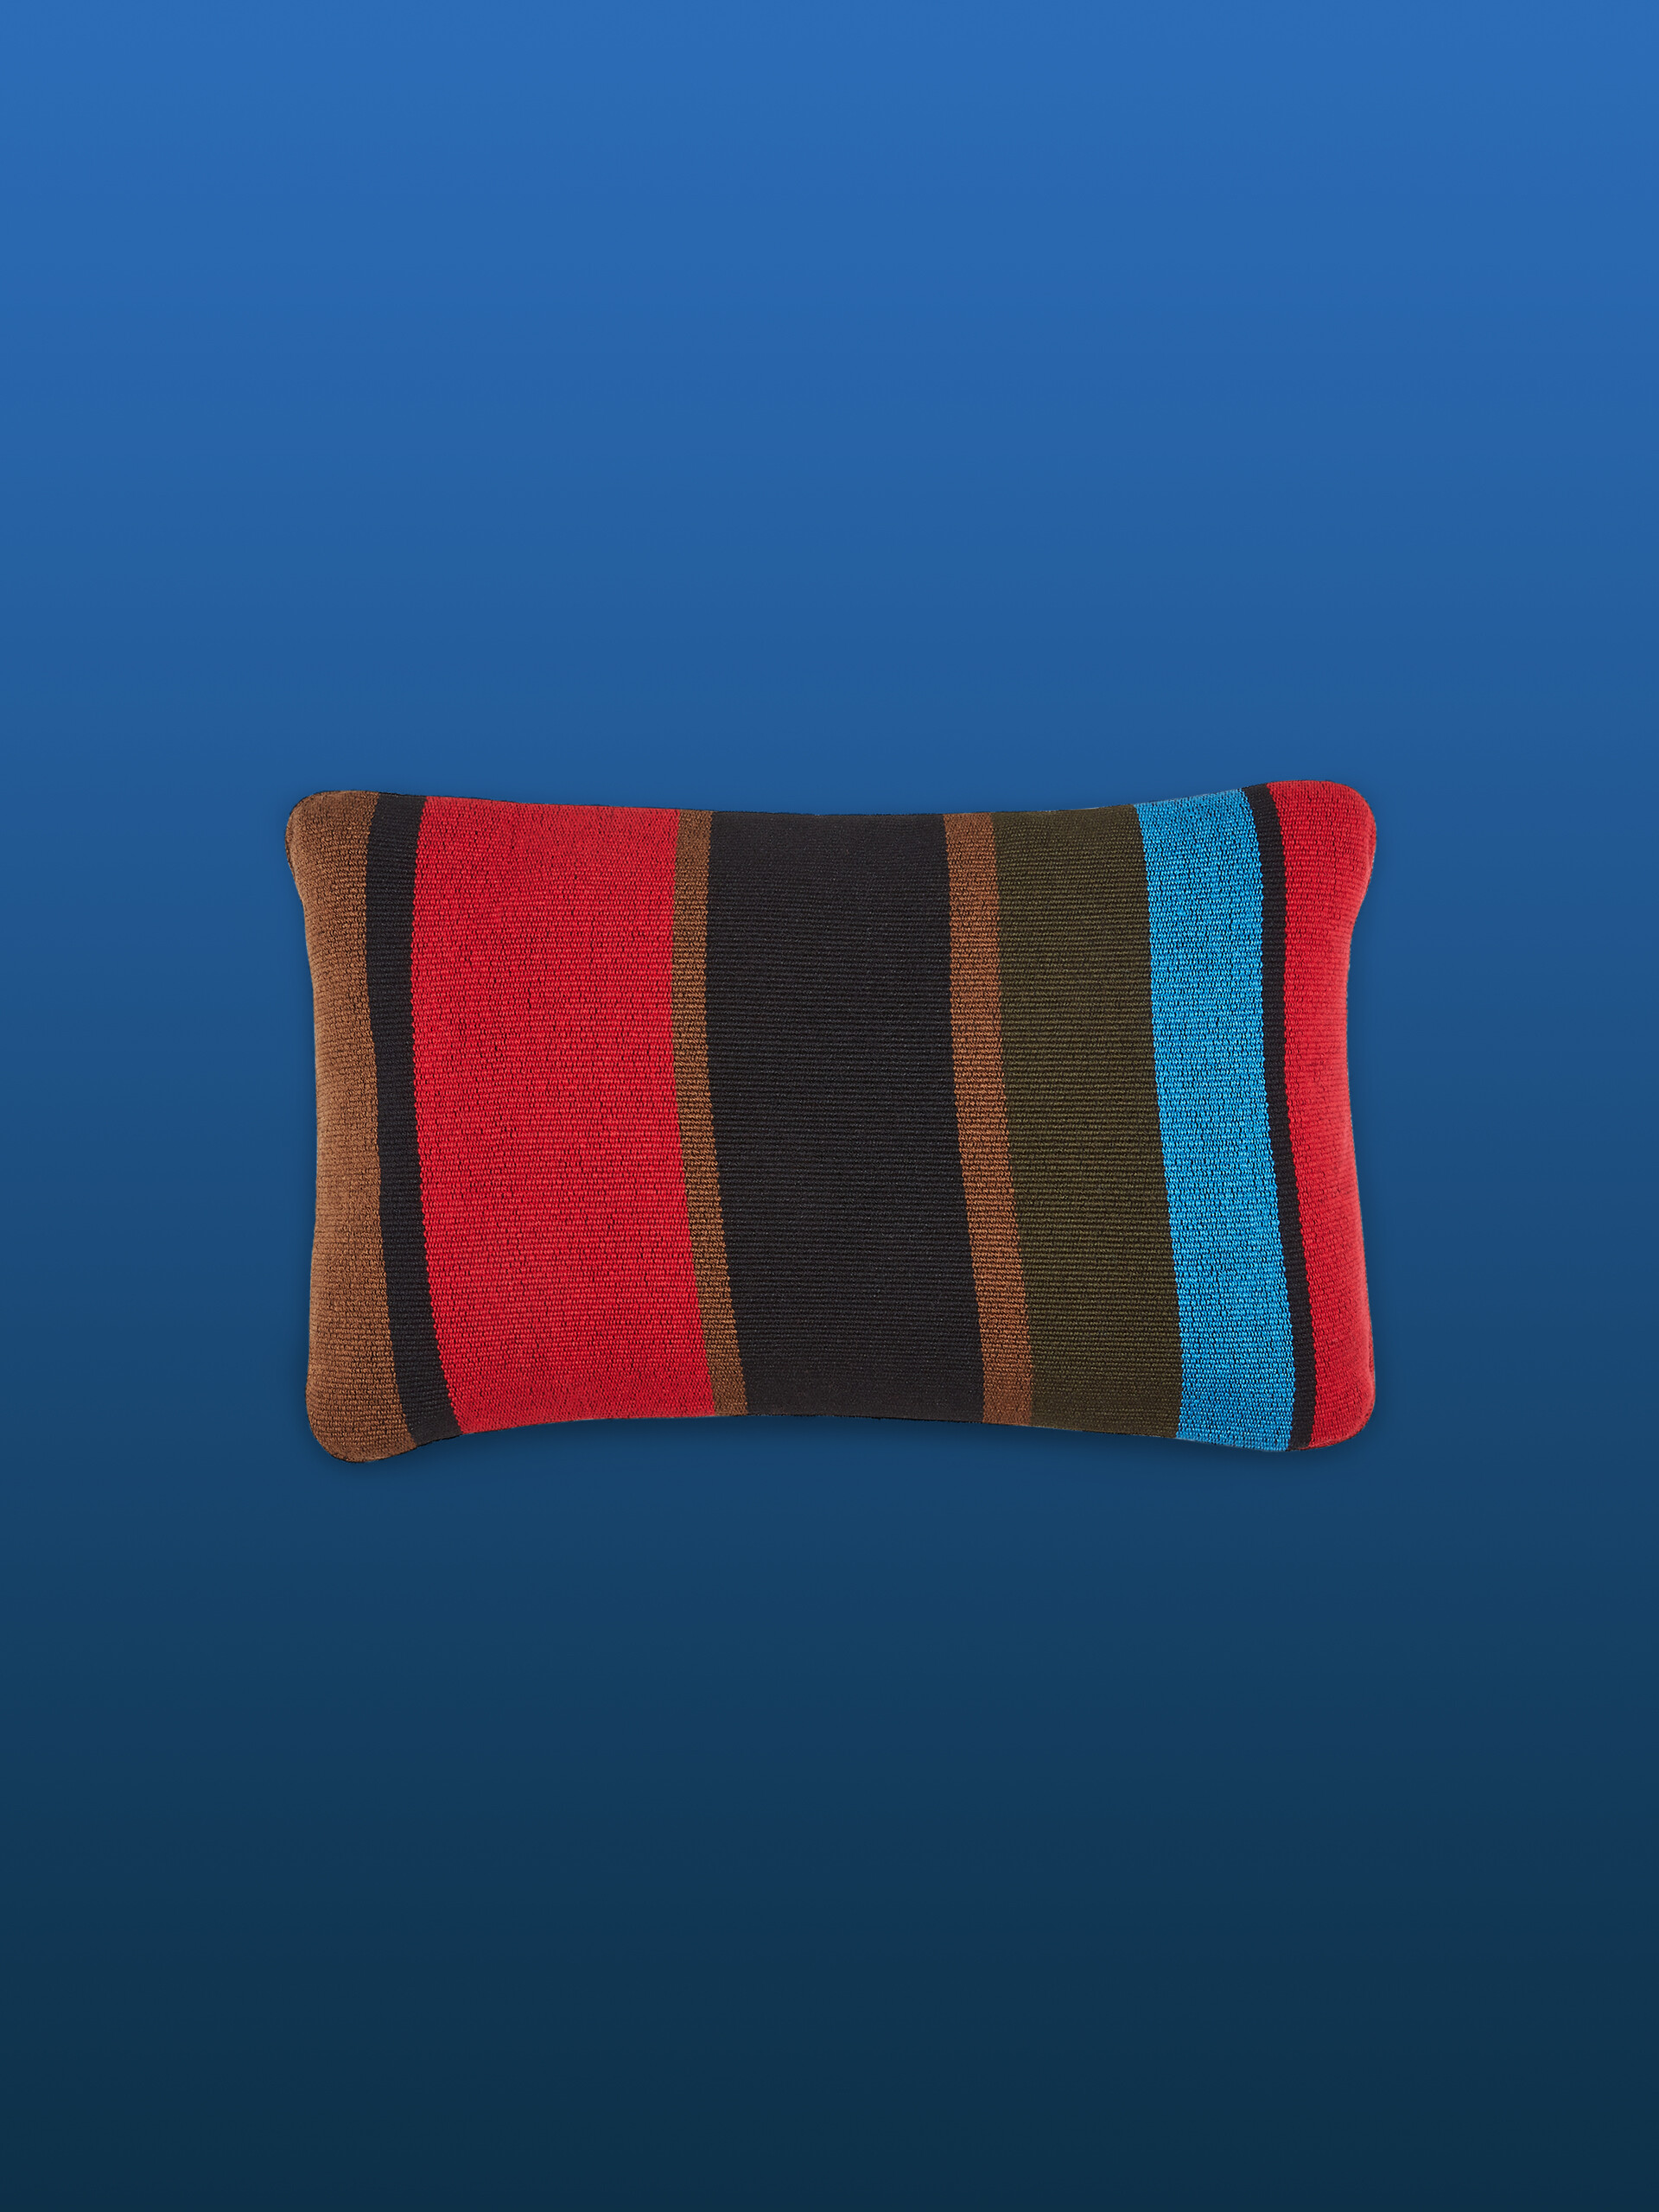 MARNI MARKET rectangular pillow cover in polyester with brown black and red vertical stripes - Furniture - Image 1